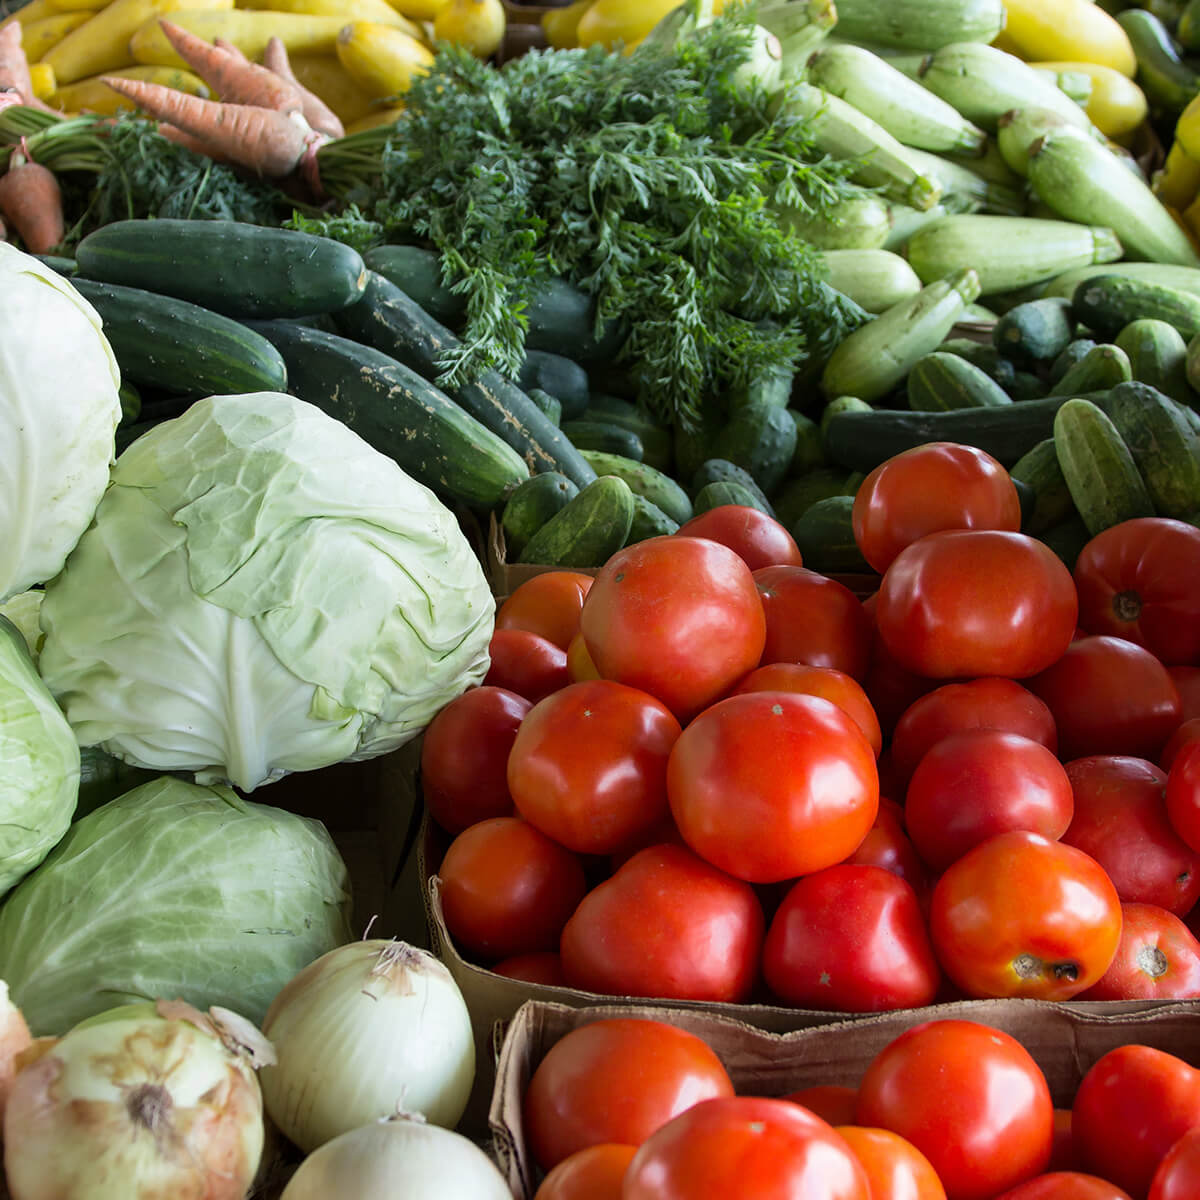 Locally Grown Healthy and Fresh Vegetables